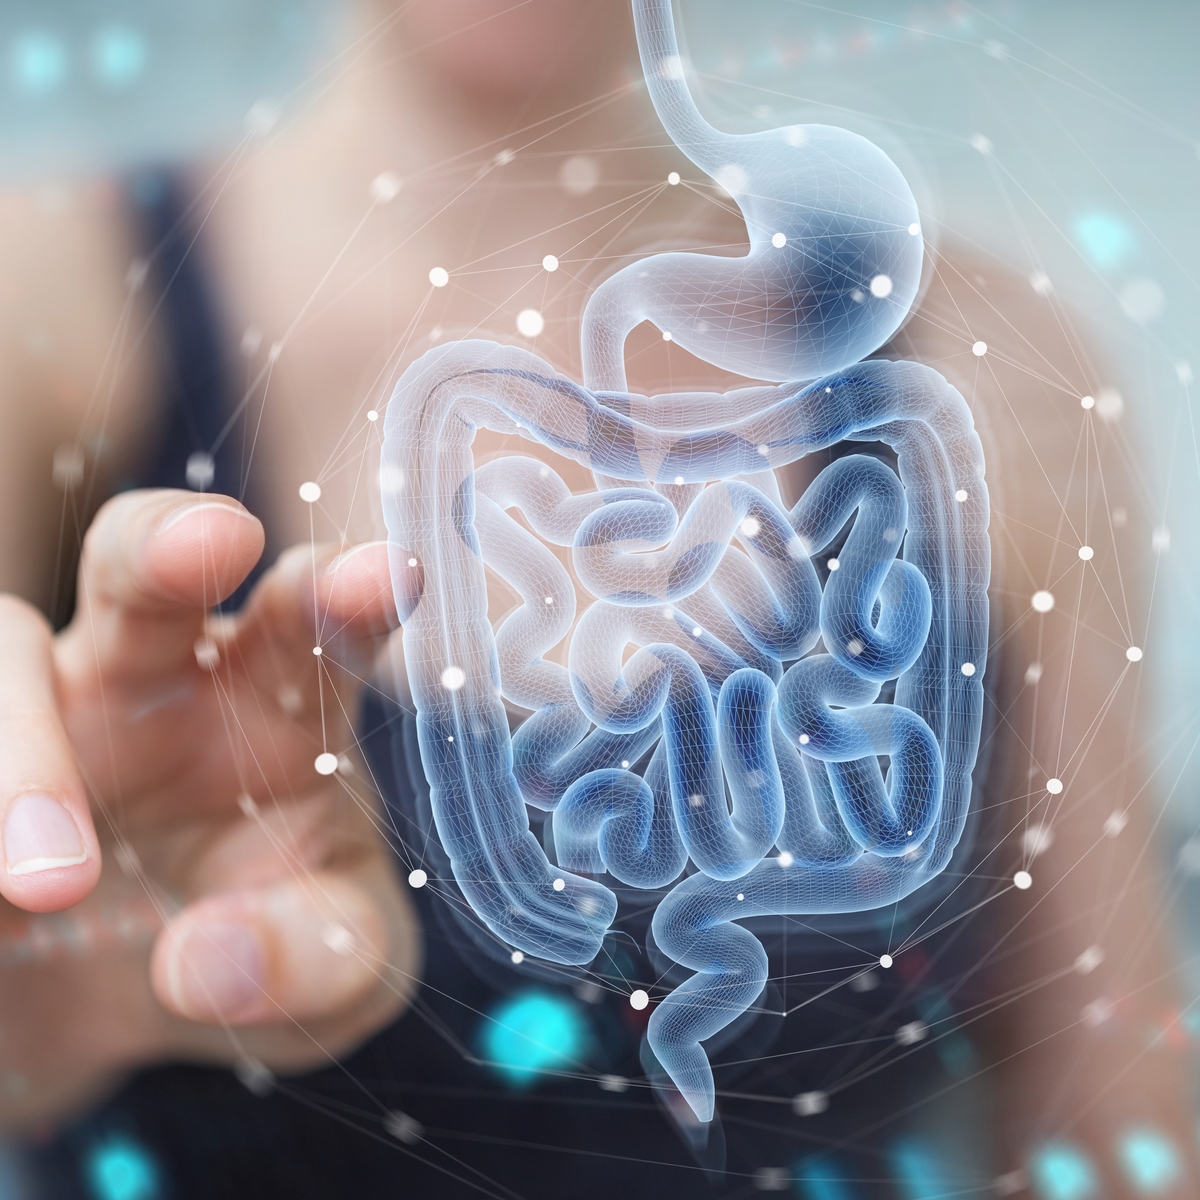 What Is Pepsin, and How Does It Benefit Digestion?